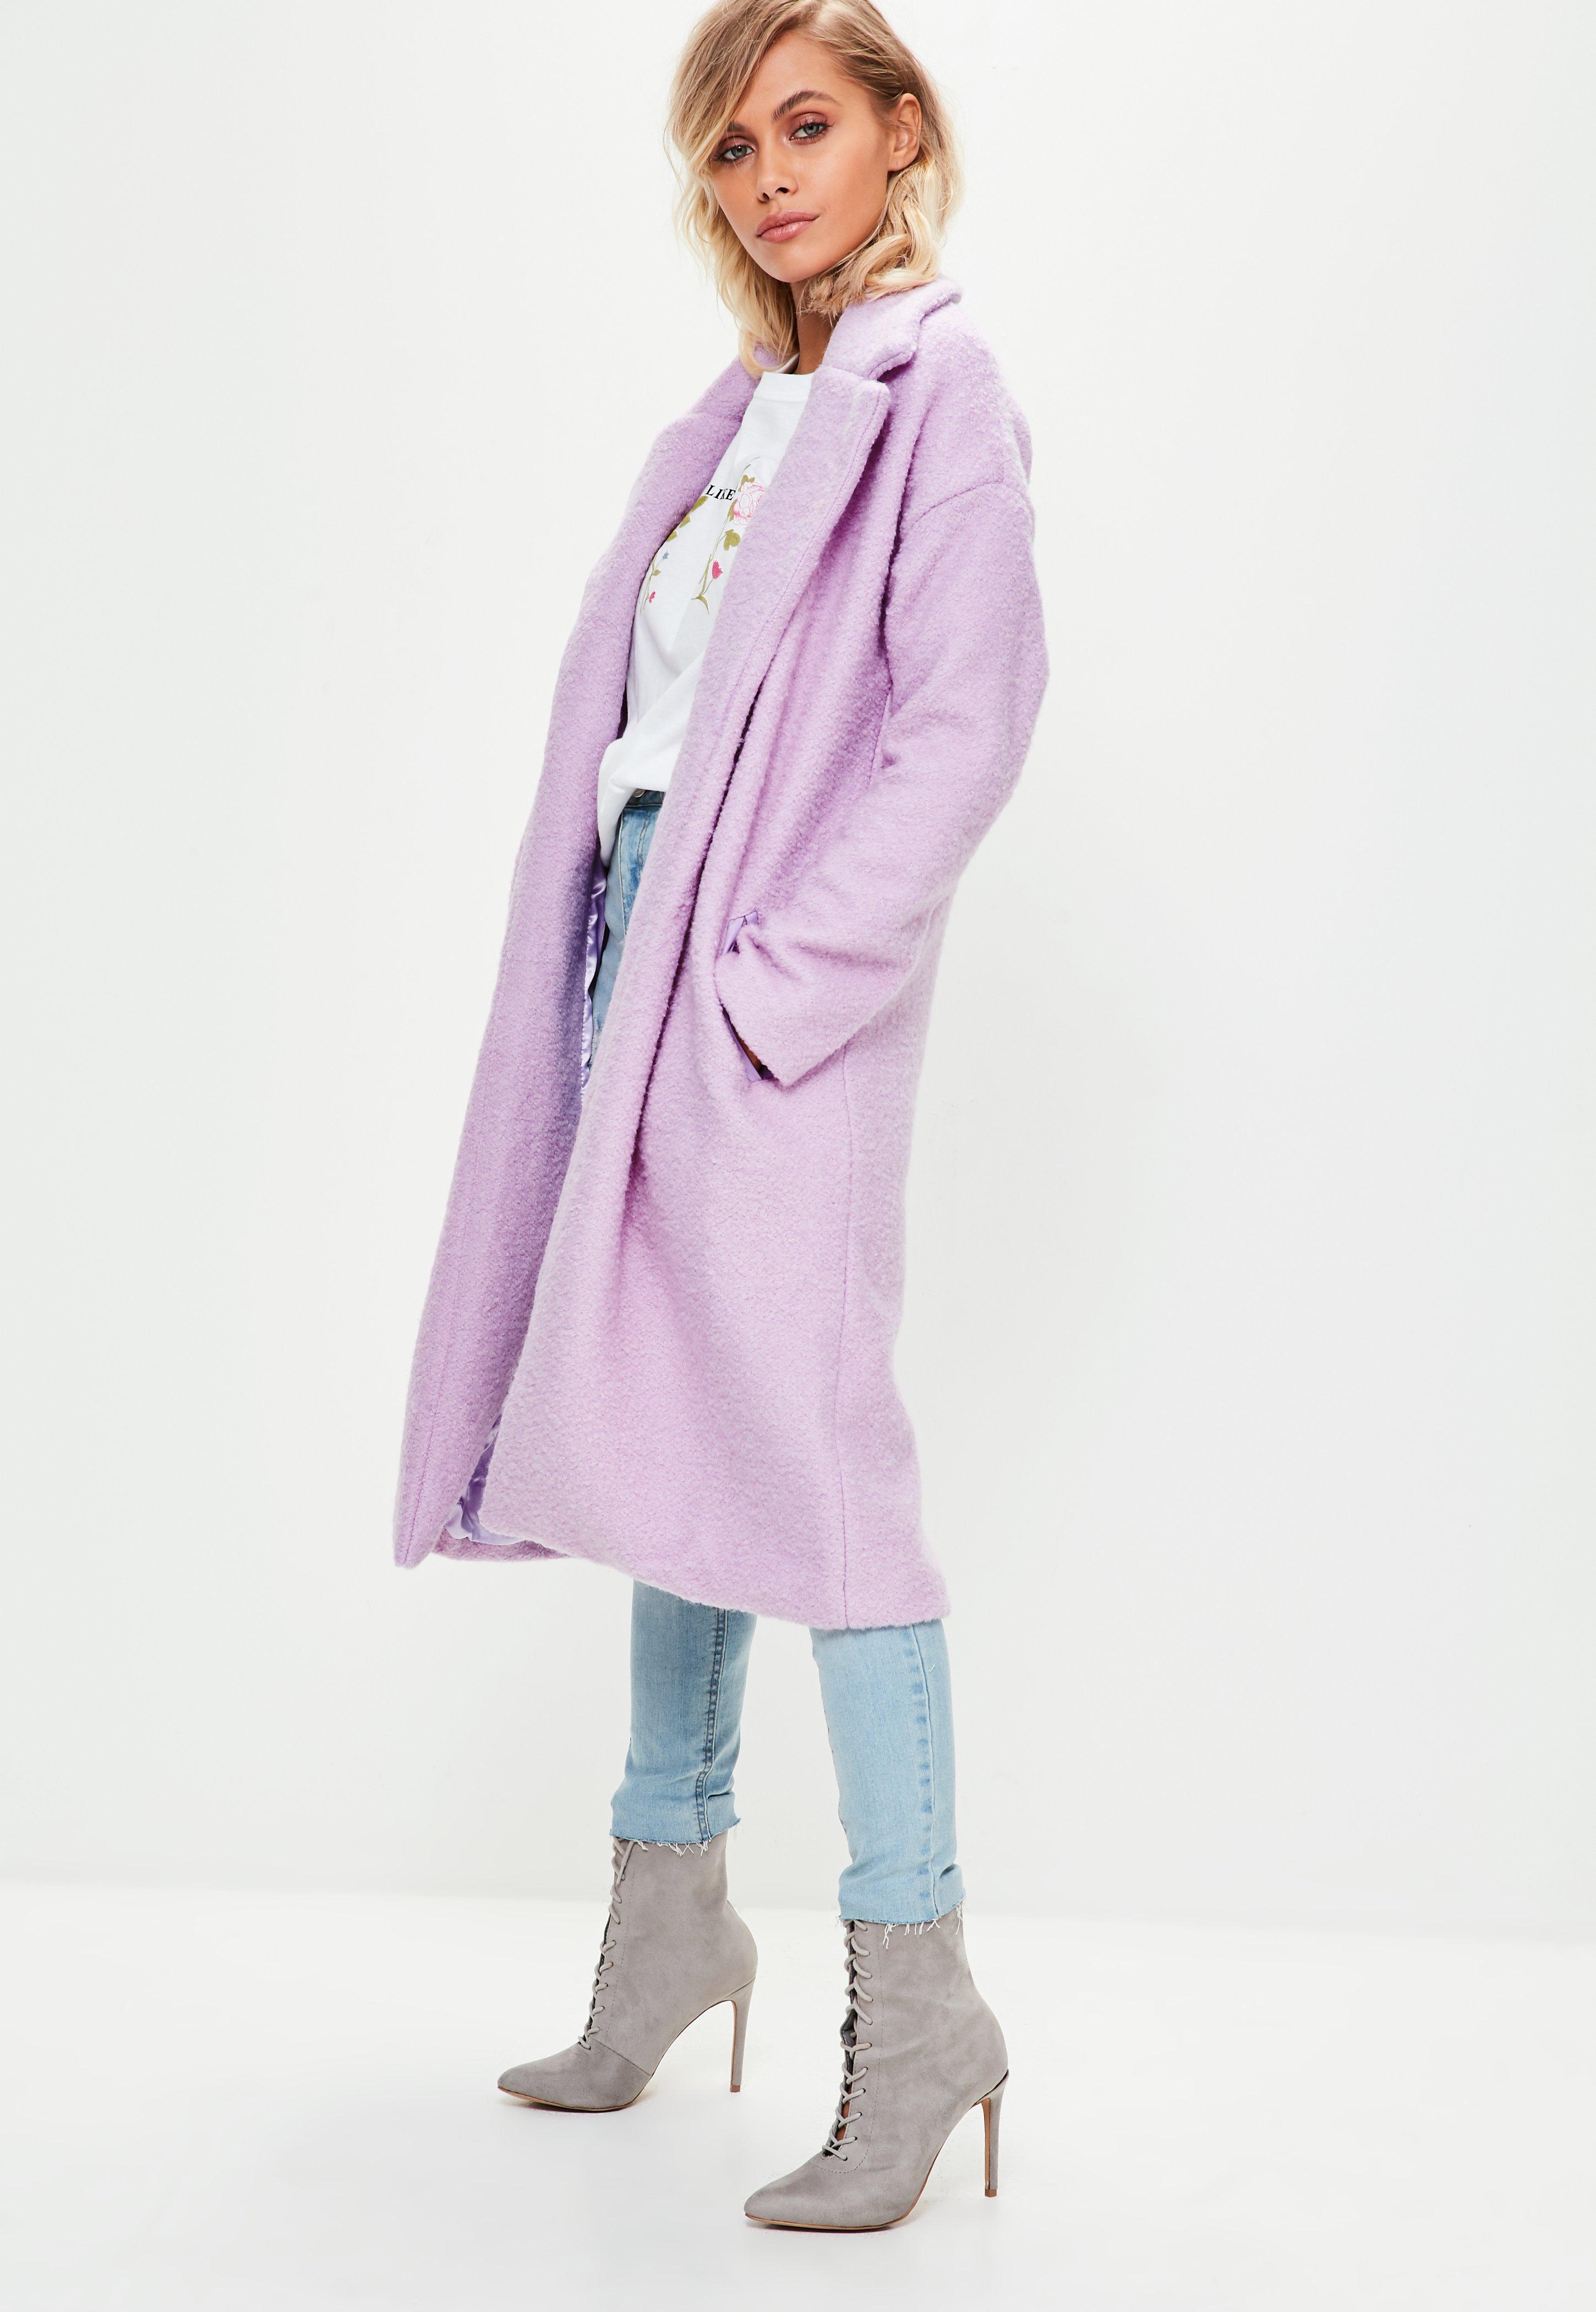 Lyst - Missguided Lilac Long Wool Coat in Purple